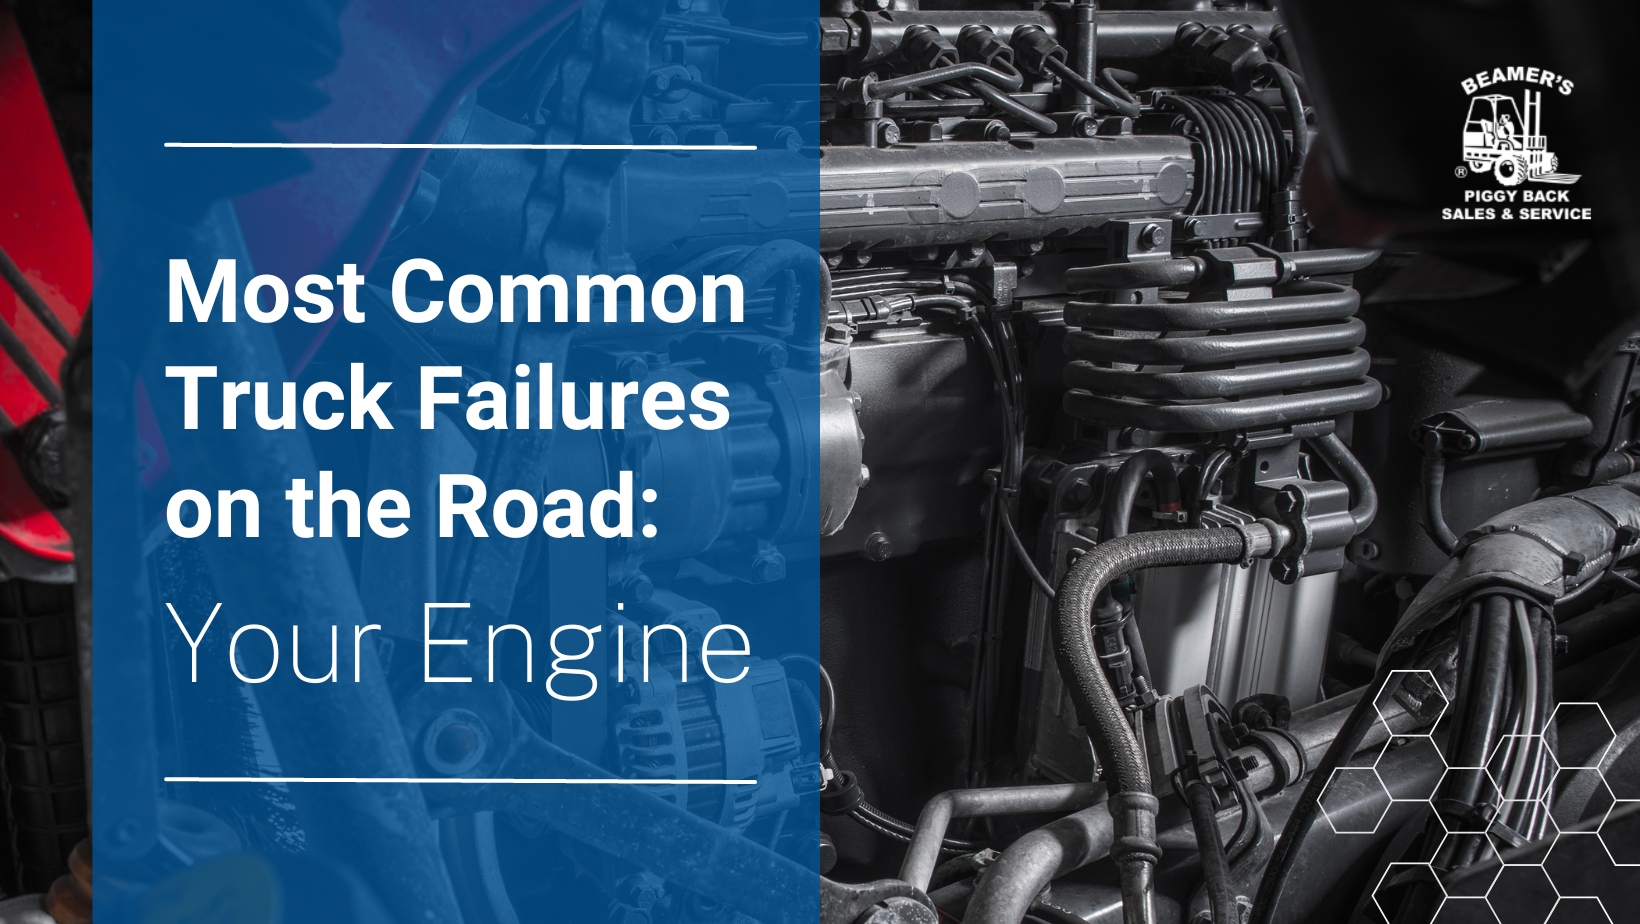 Most Common Truck Failure Problems on the Road: Your Engine 